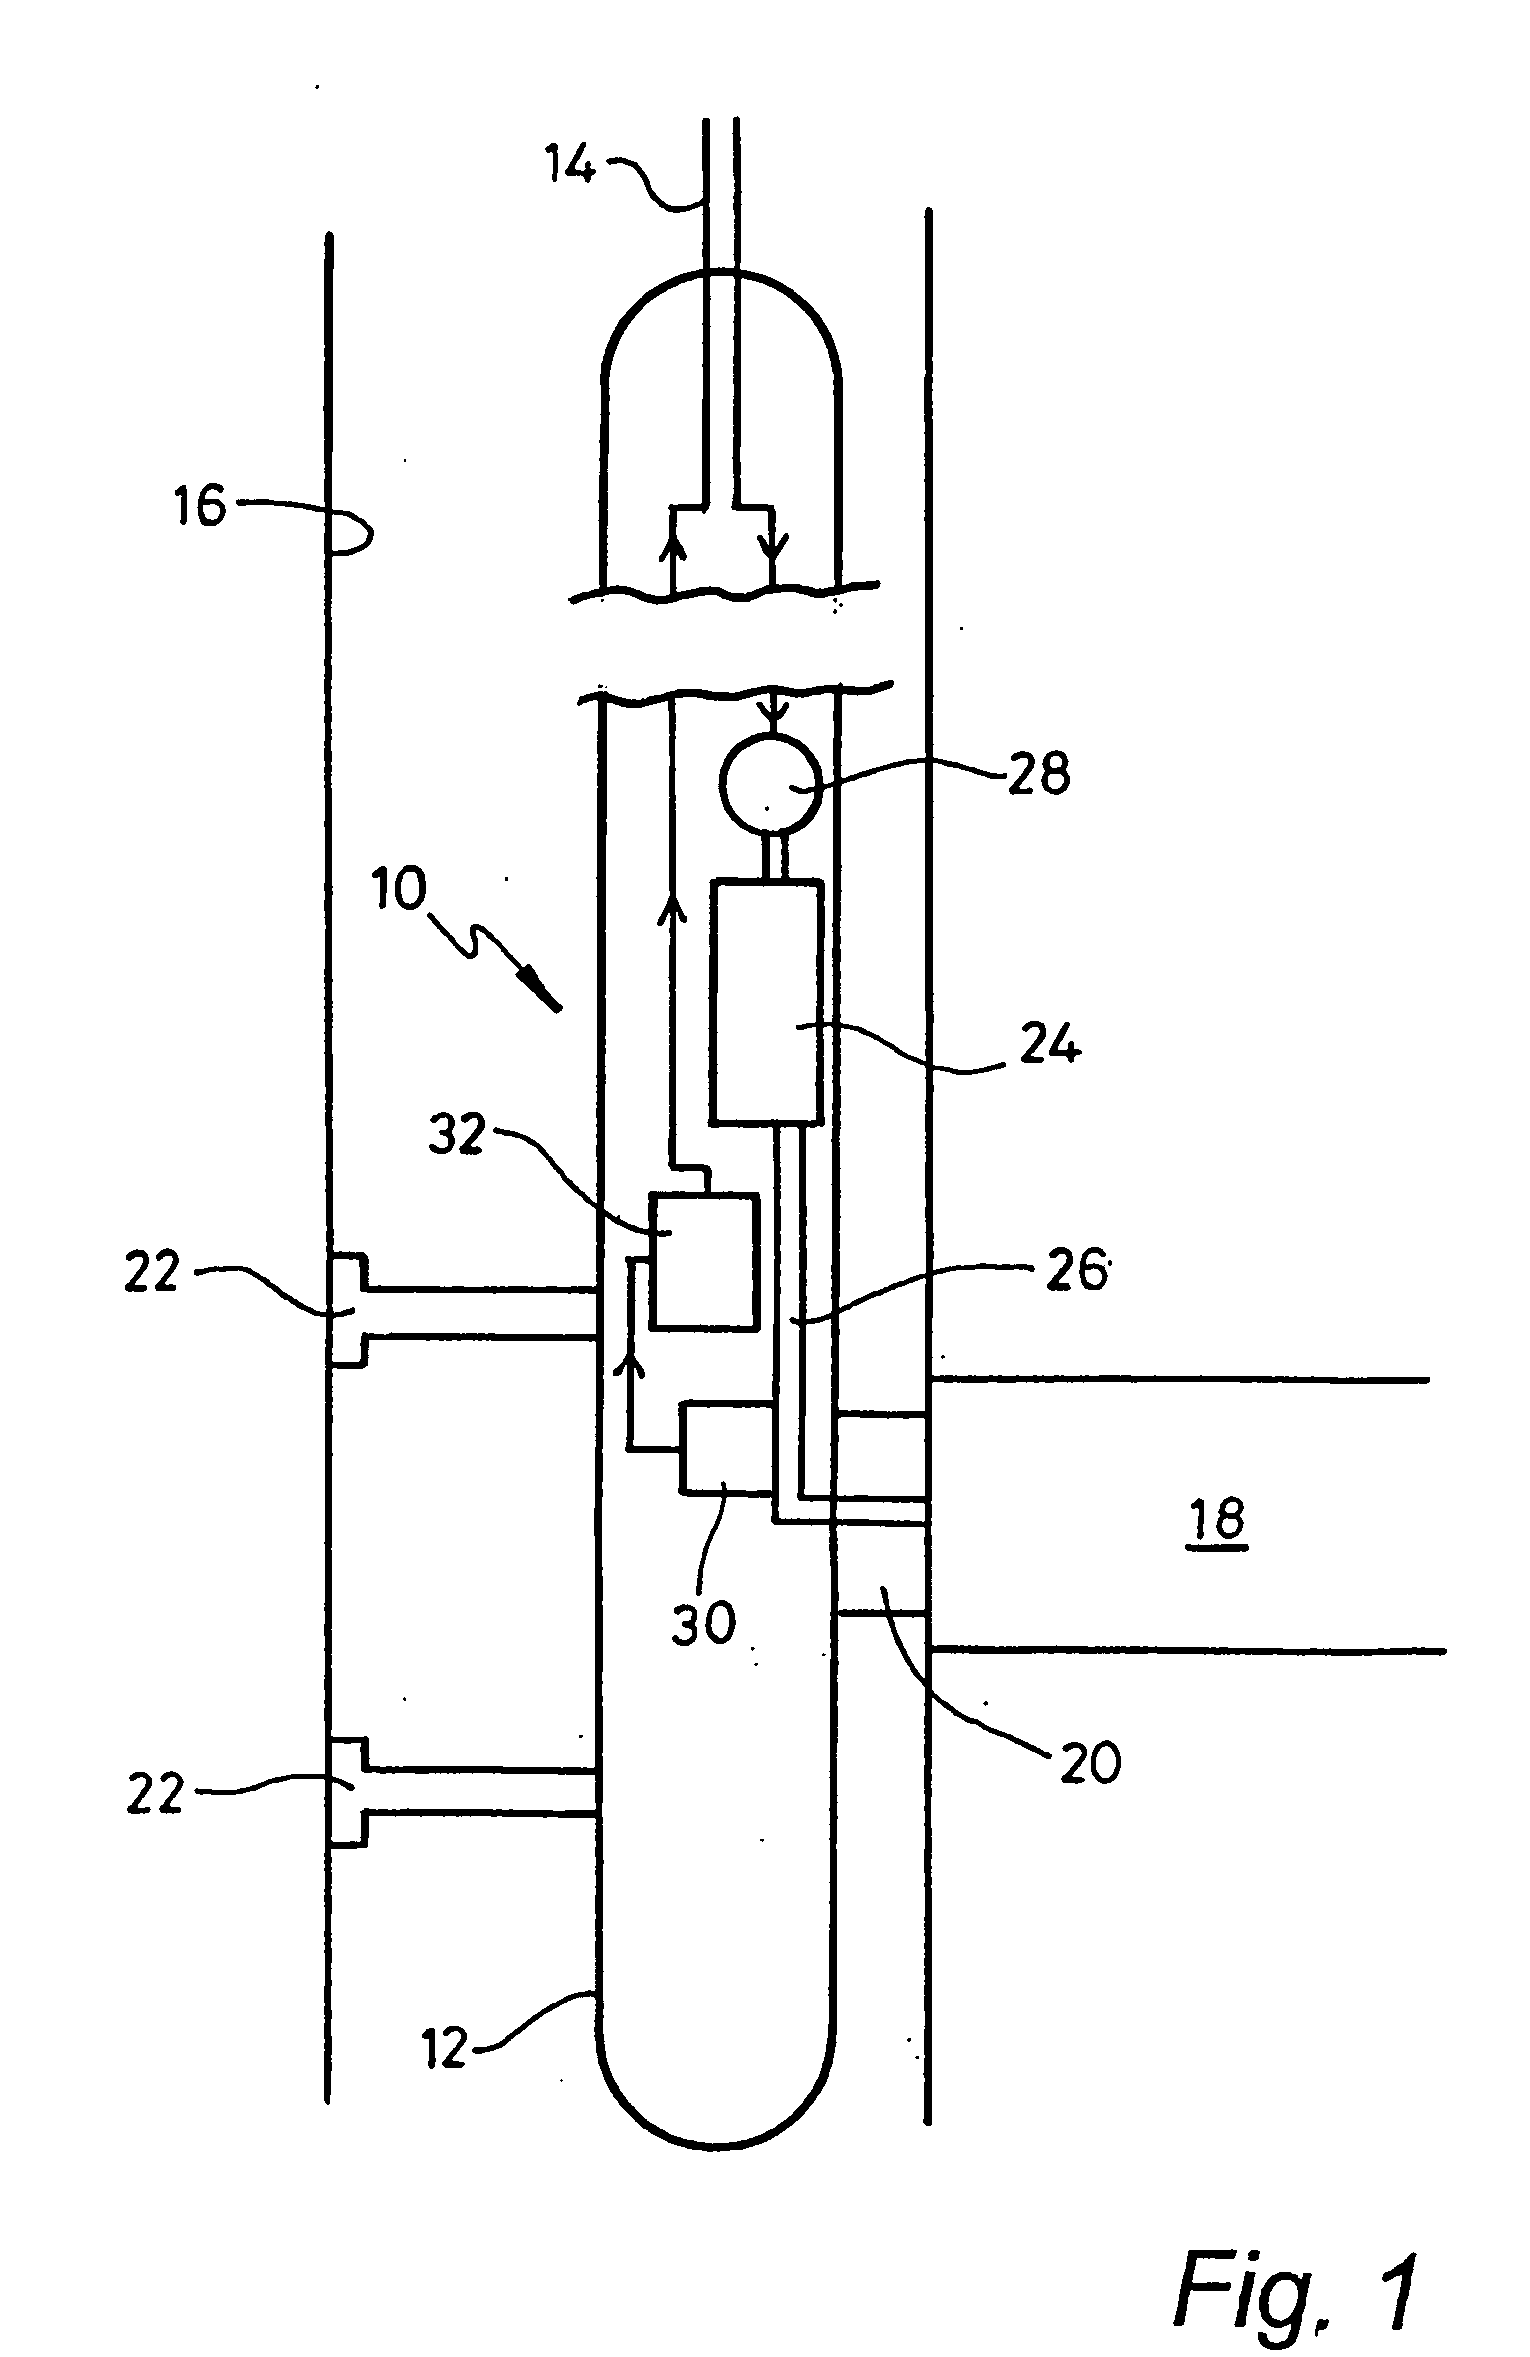 Methods and apparatus for the measurement of hydrogen sulphide and thiols in fuids